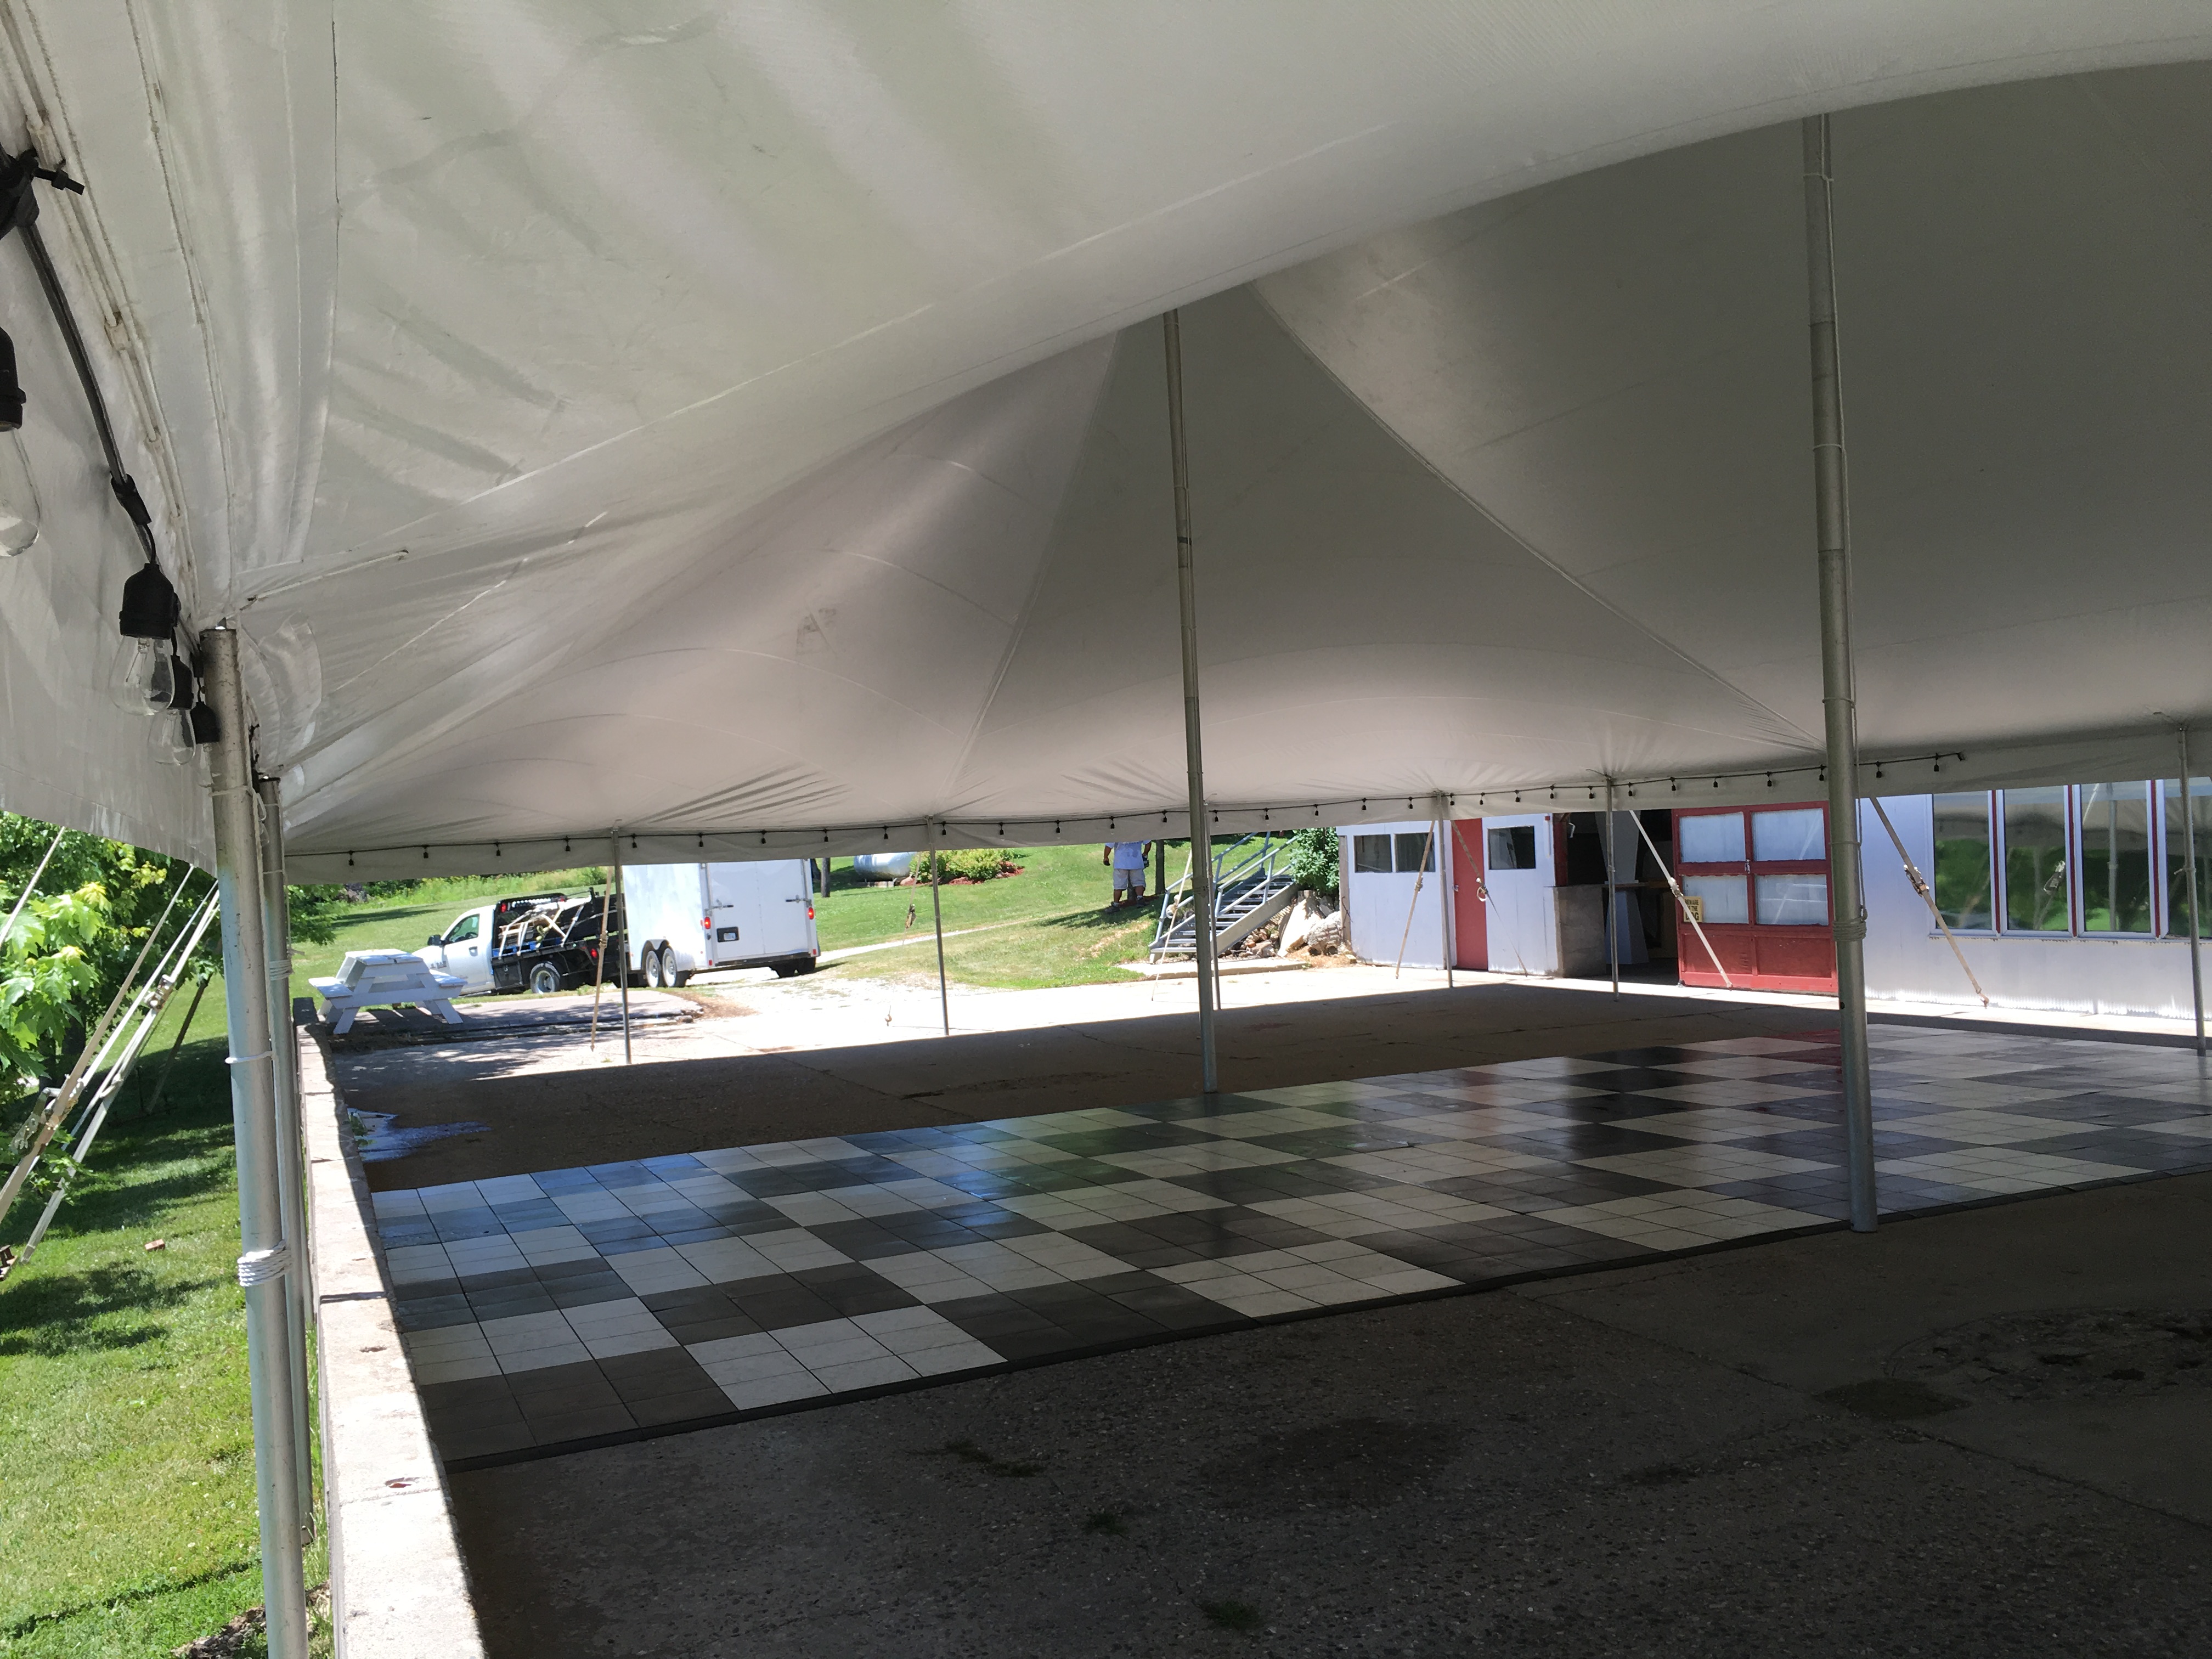 Under 40'x60' Rope and Pole Tent with concrete wall obstruction at an outdoor wedding reception in Columbus Junction, IA